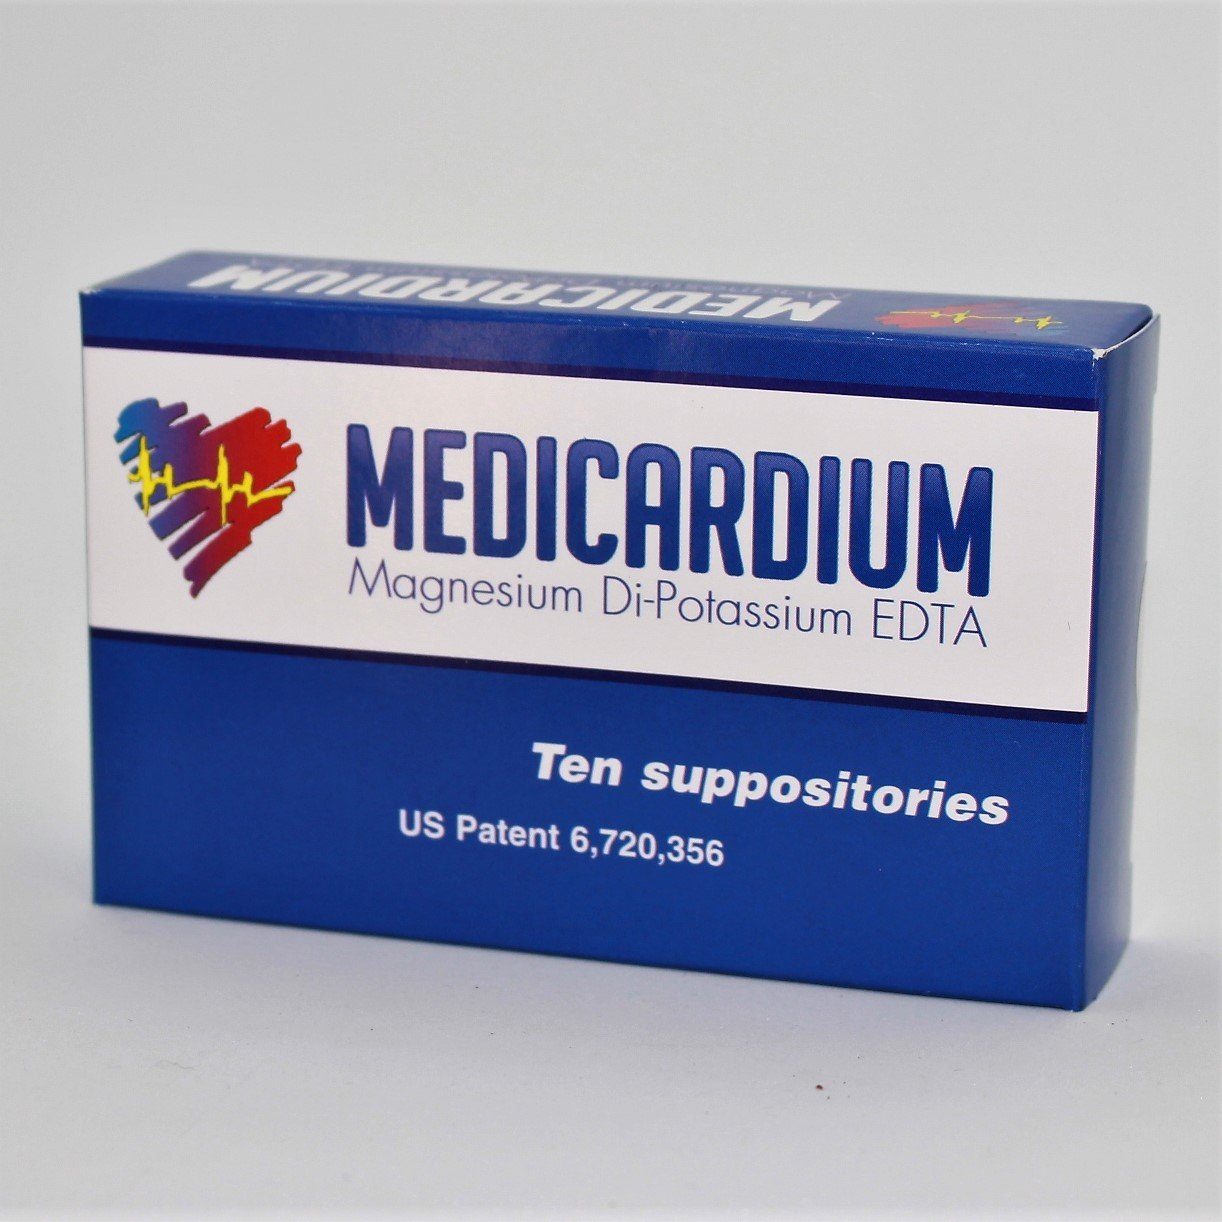 Medicardium: Heavy Metal and Calcification Detox (10 Suppositories)